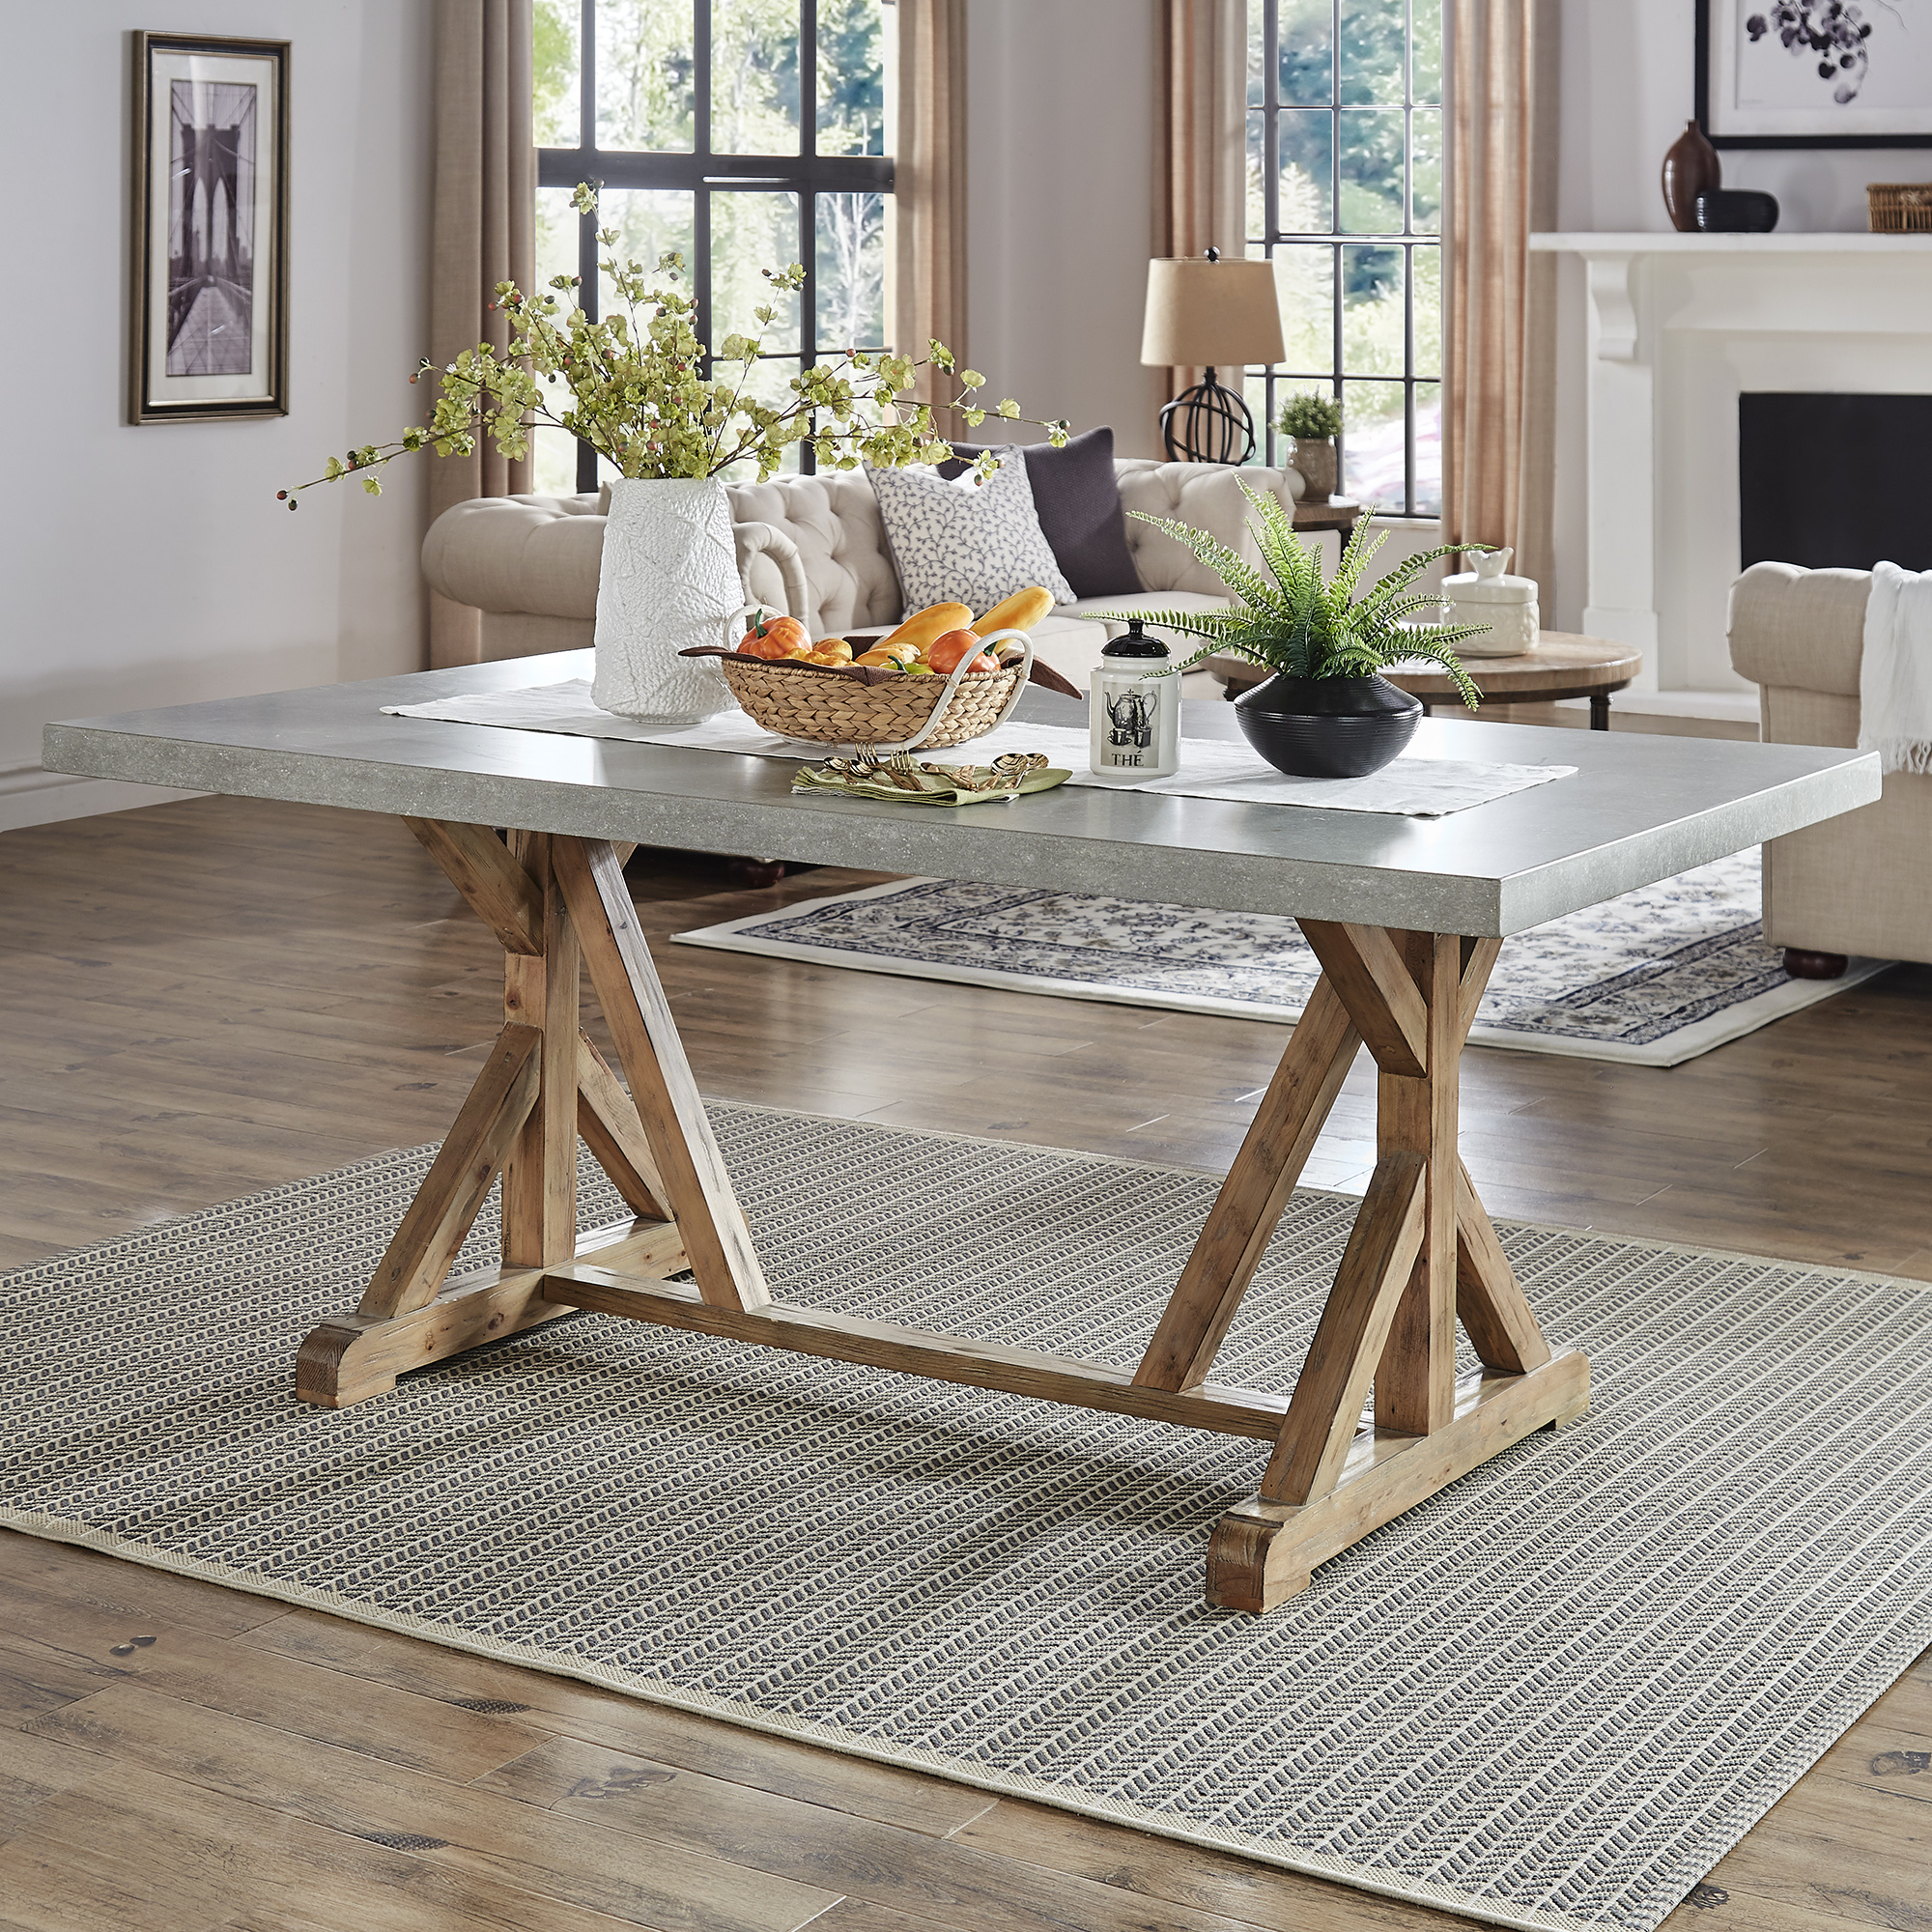 Rustic Pine Concrete Table Top Dining Table